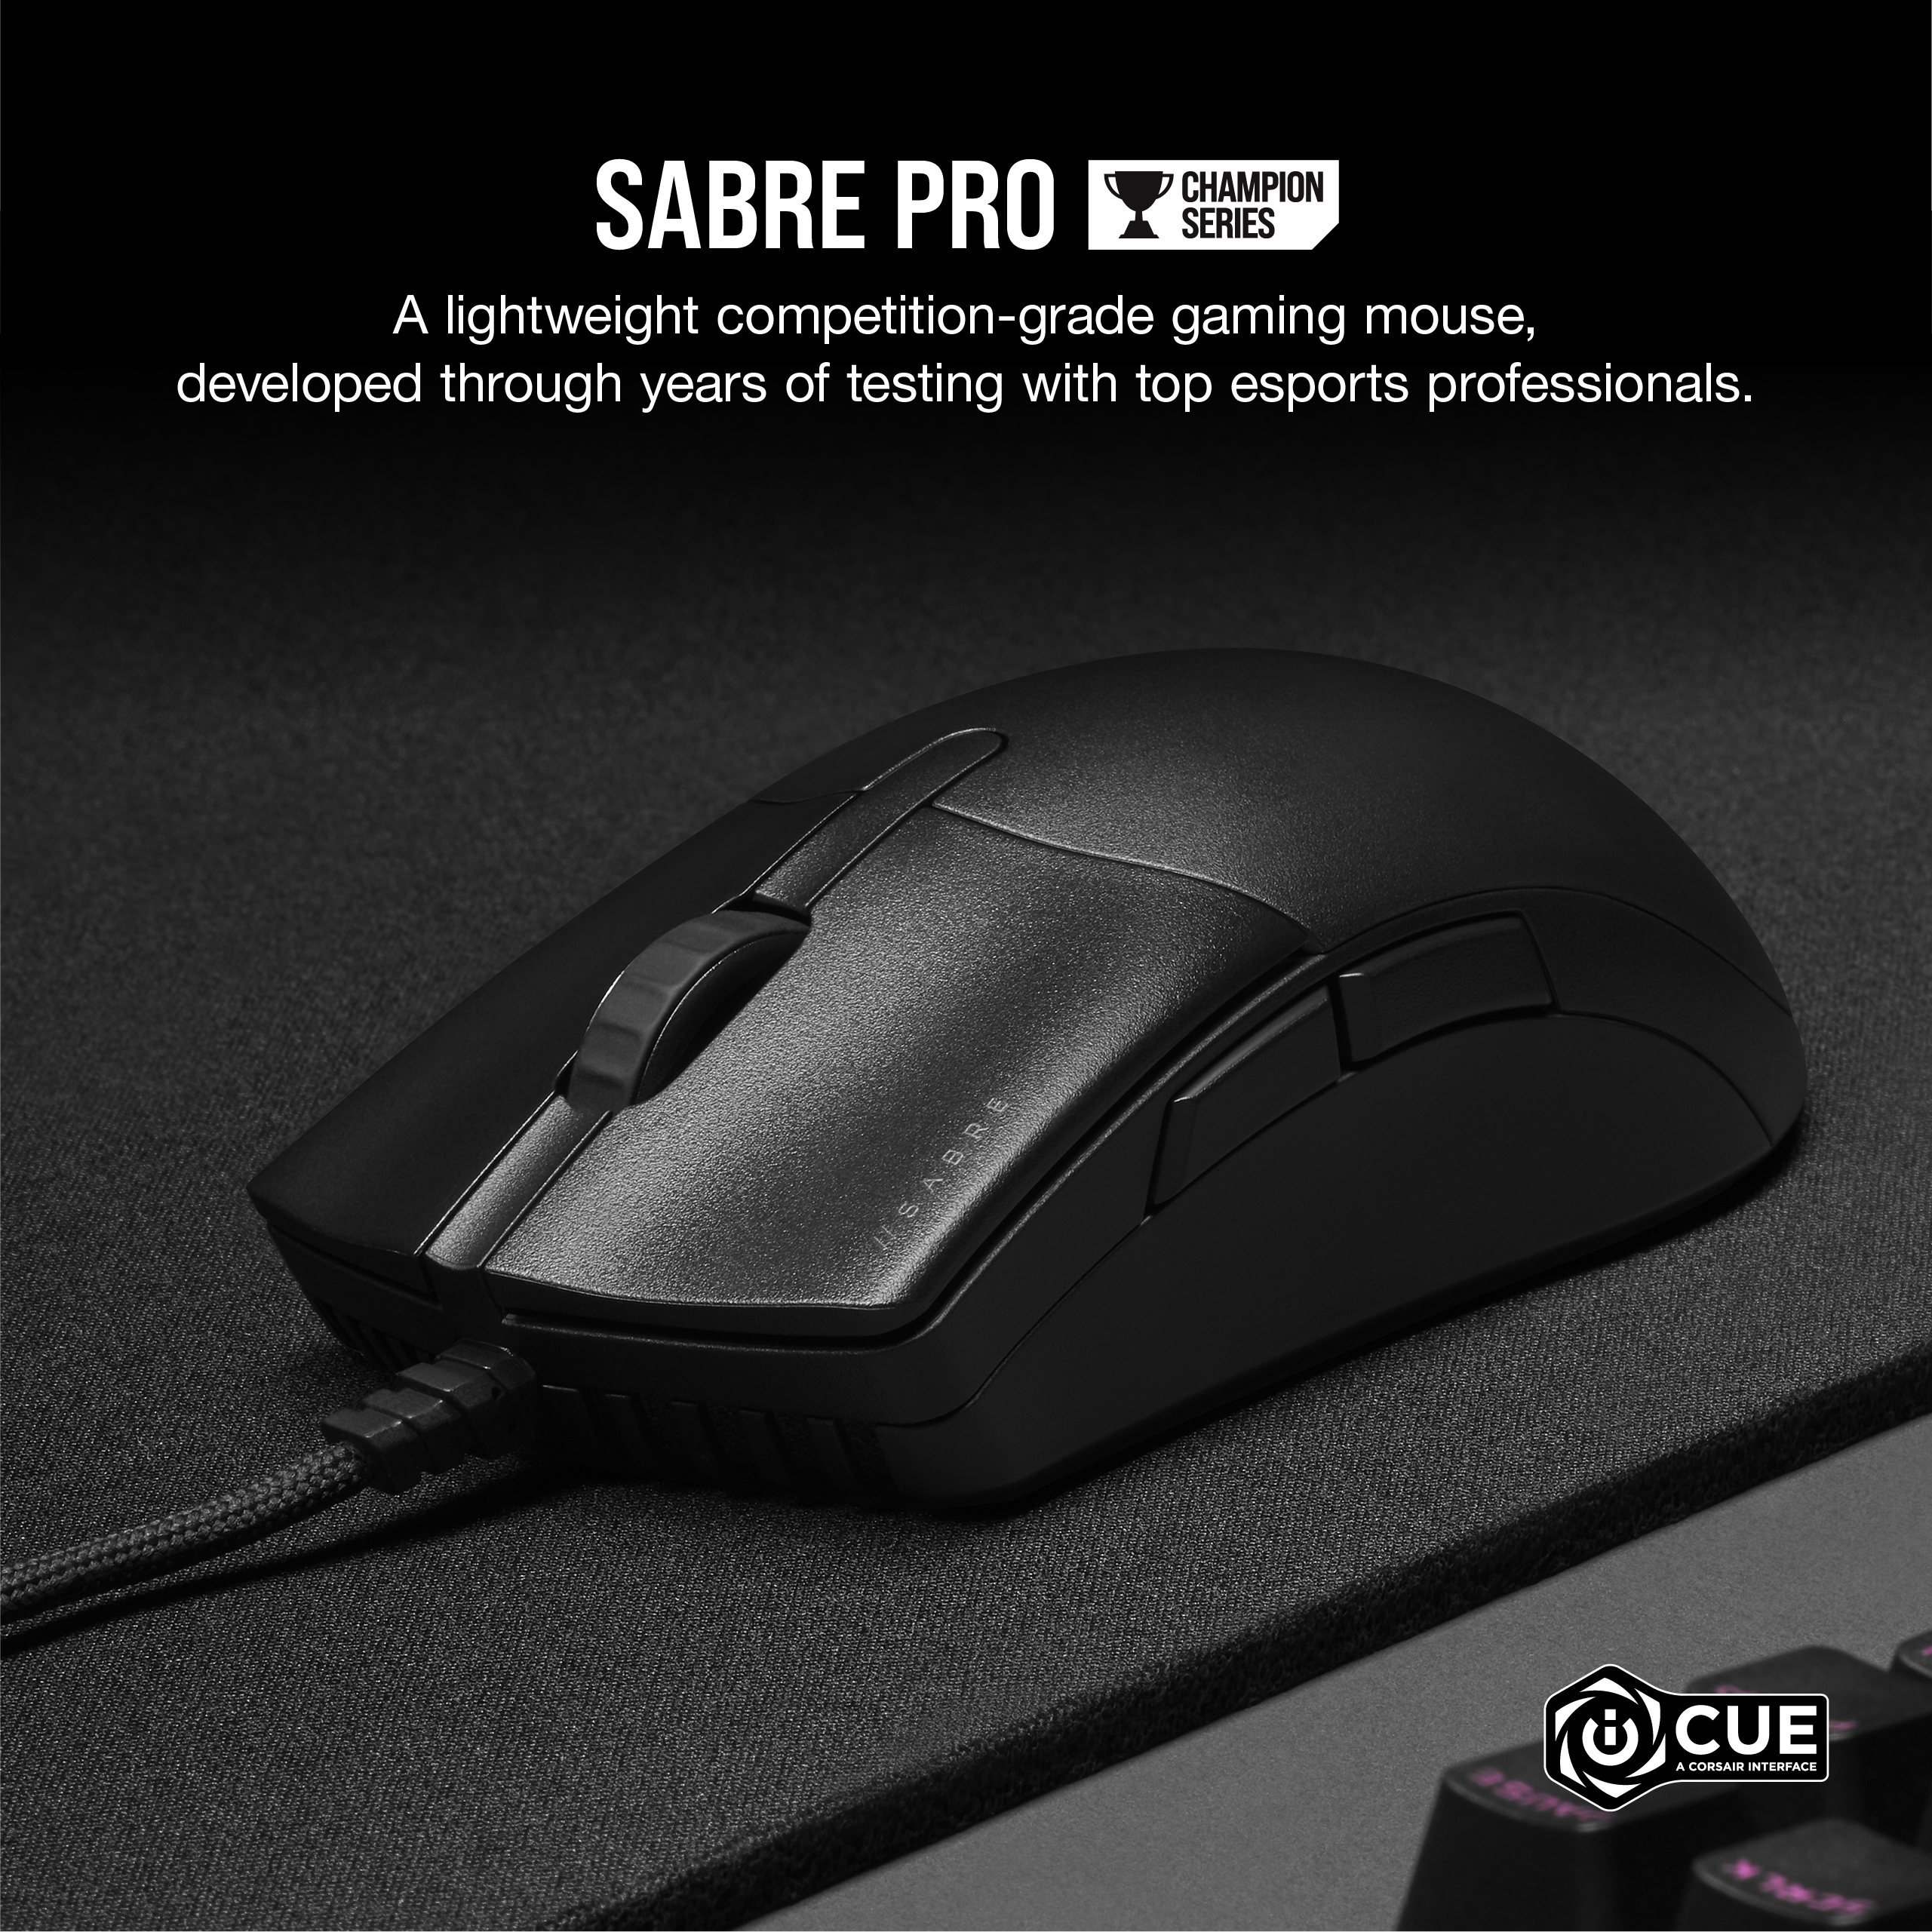  <b>Wired Gaming Mouse: </b>Corsair Sabre pro Champion Series - 69 g Lightweight, 18000 DPI, Optical  PMW3392, 8000Hz, Quickstrike buttons  